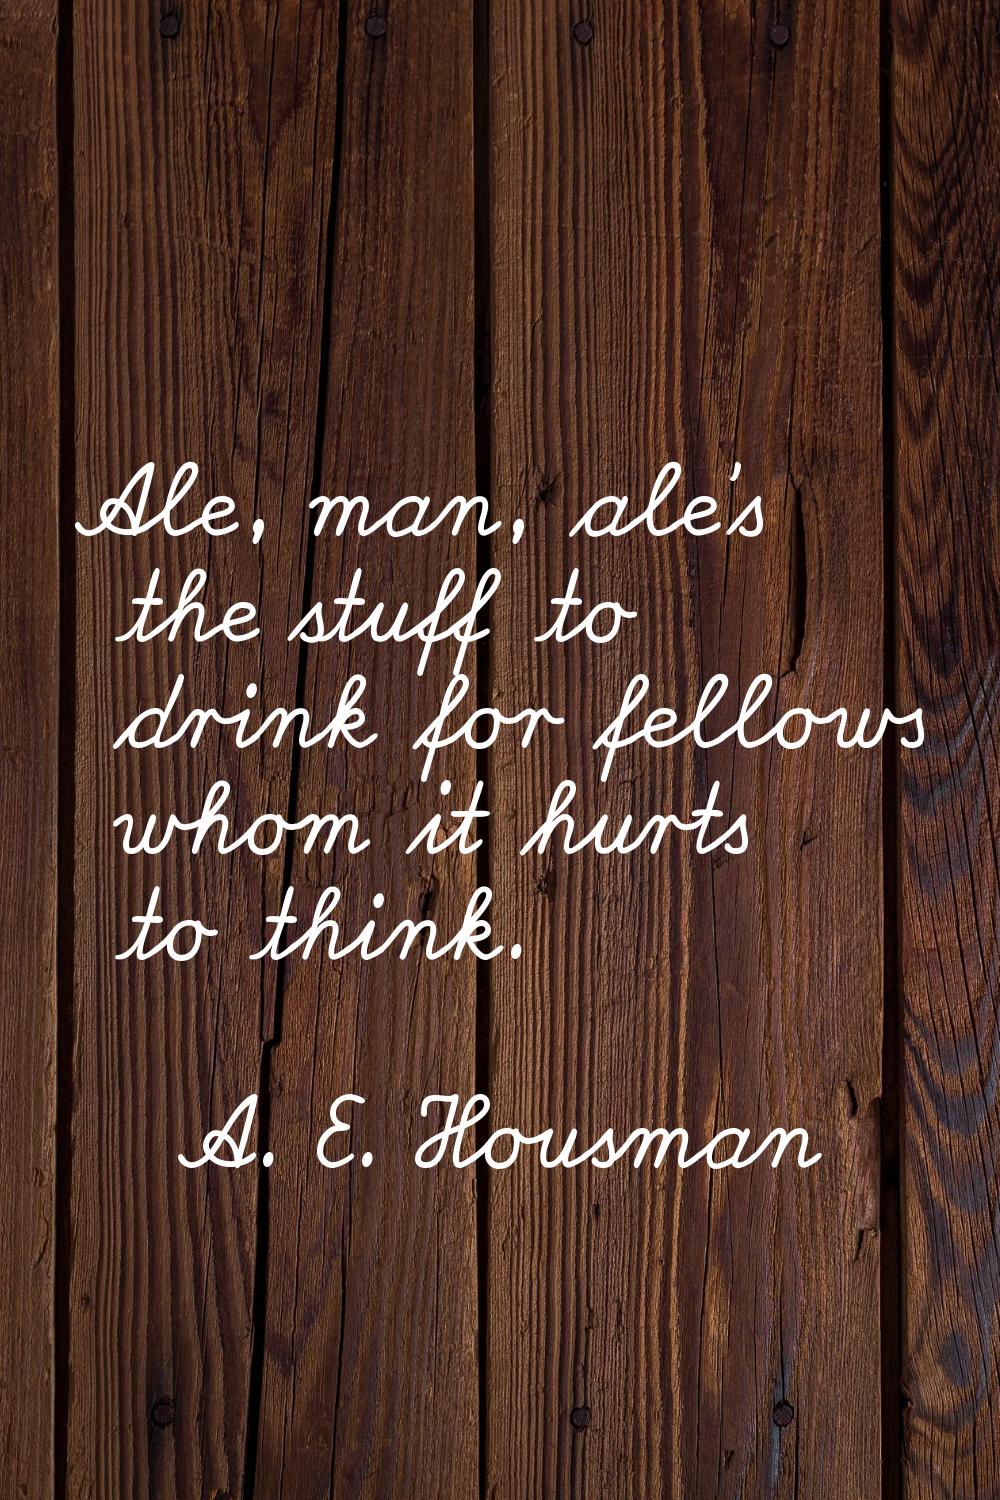 Ale, man, ale's the stuff to drink for fellows whom it hurts to think.